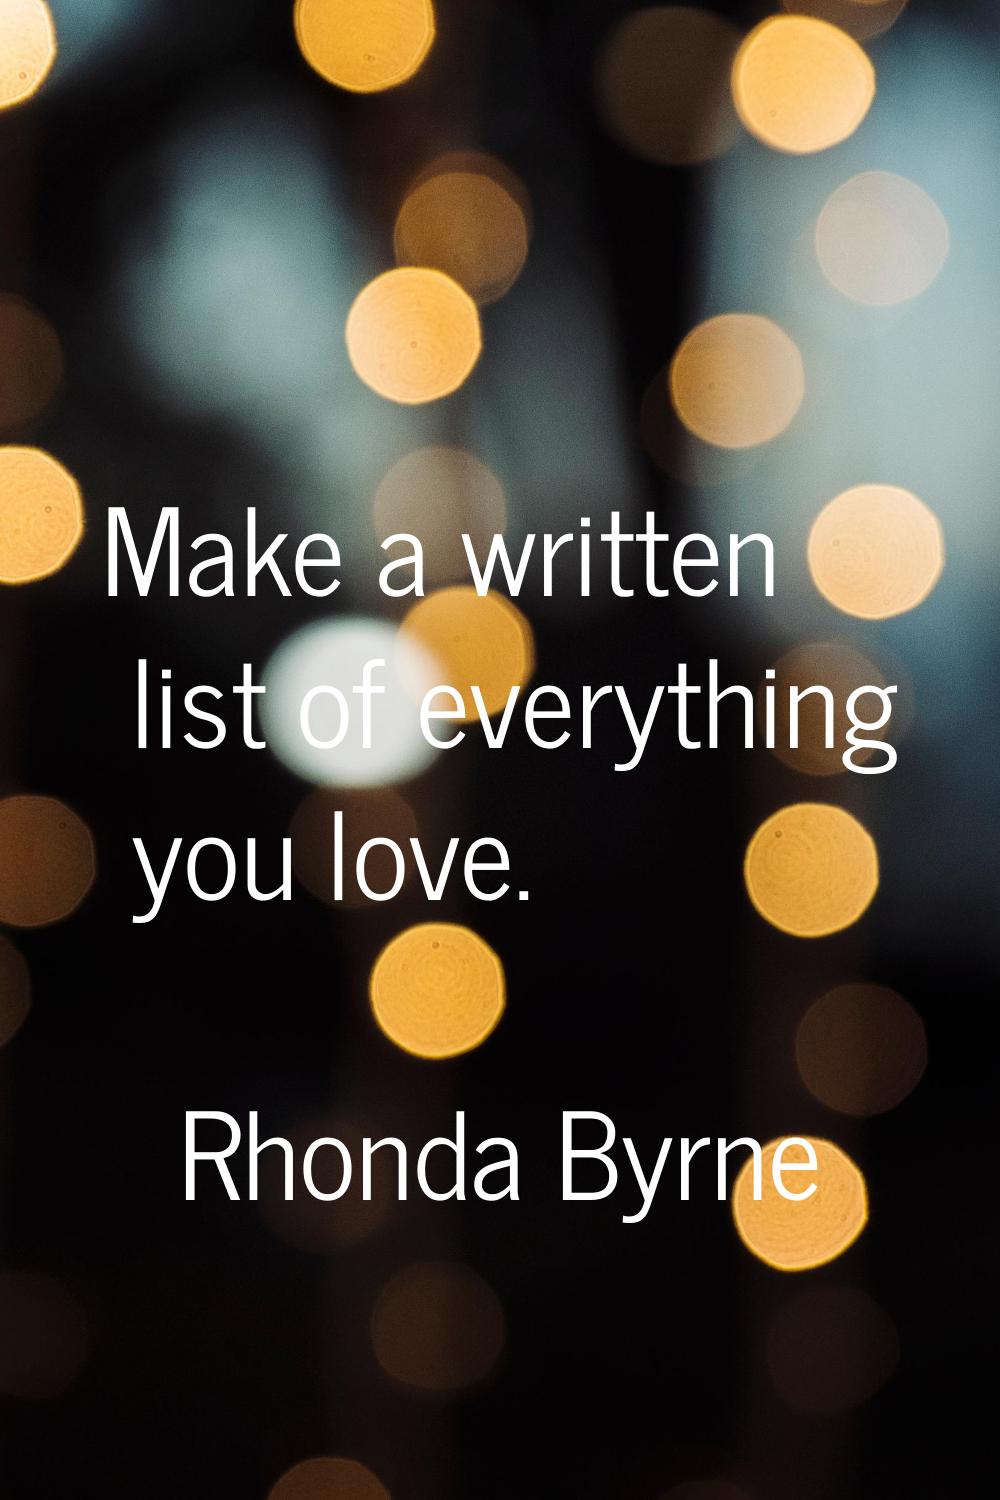 Make a written list of everything you love.